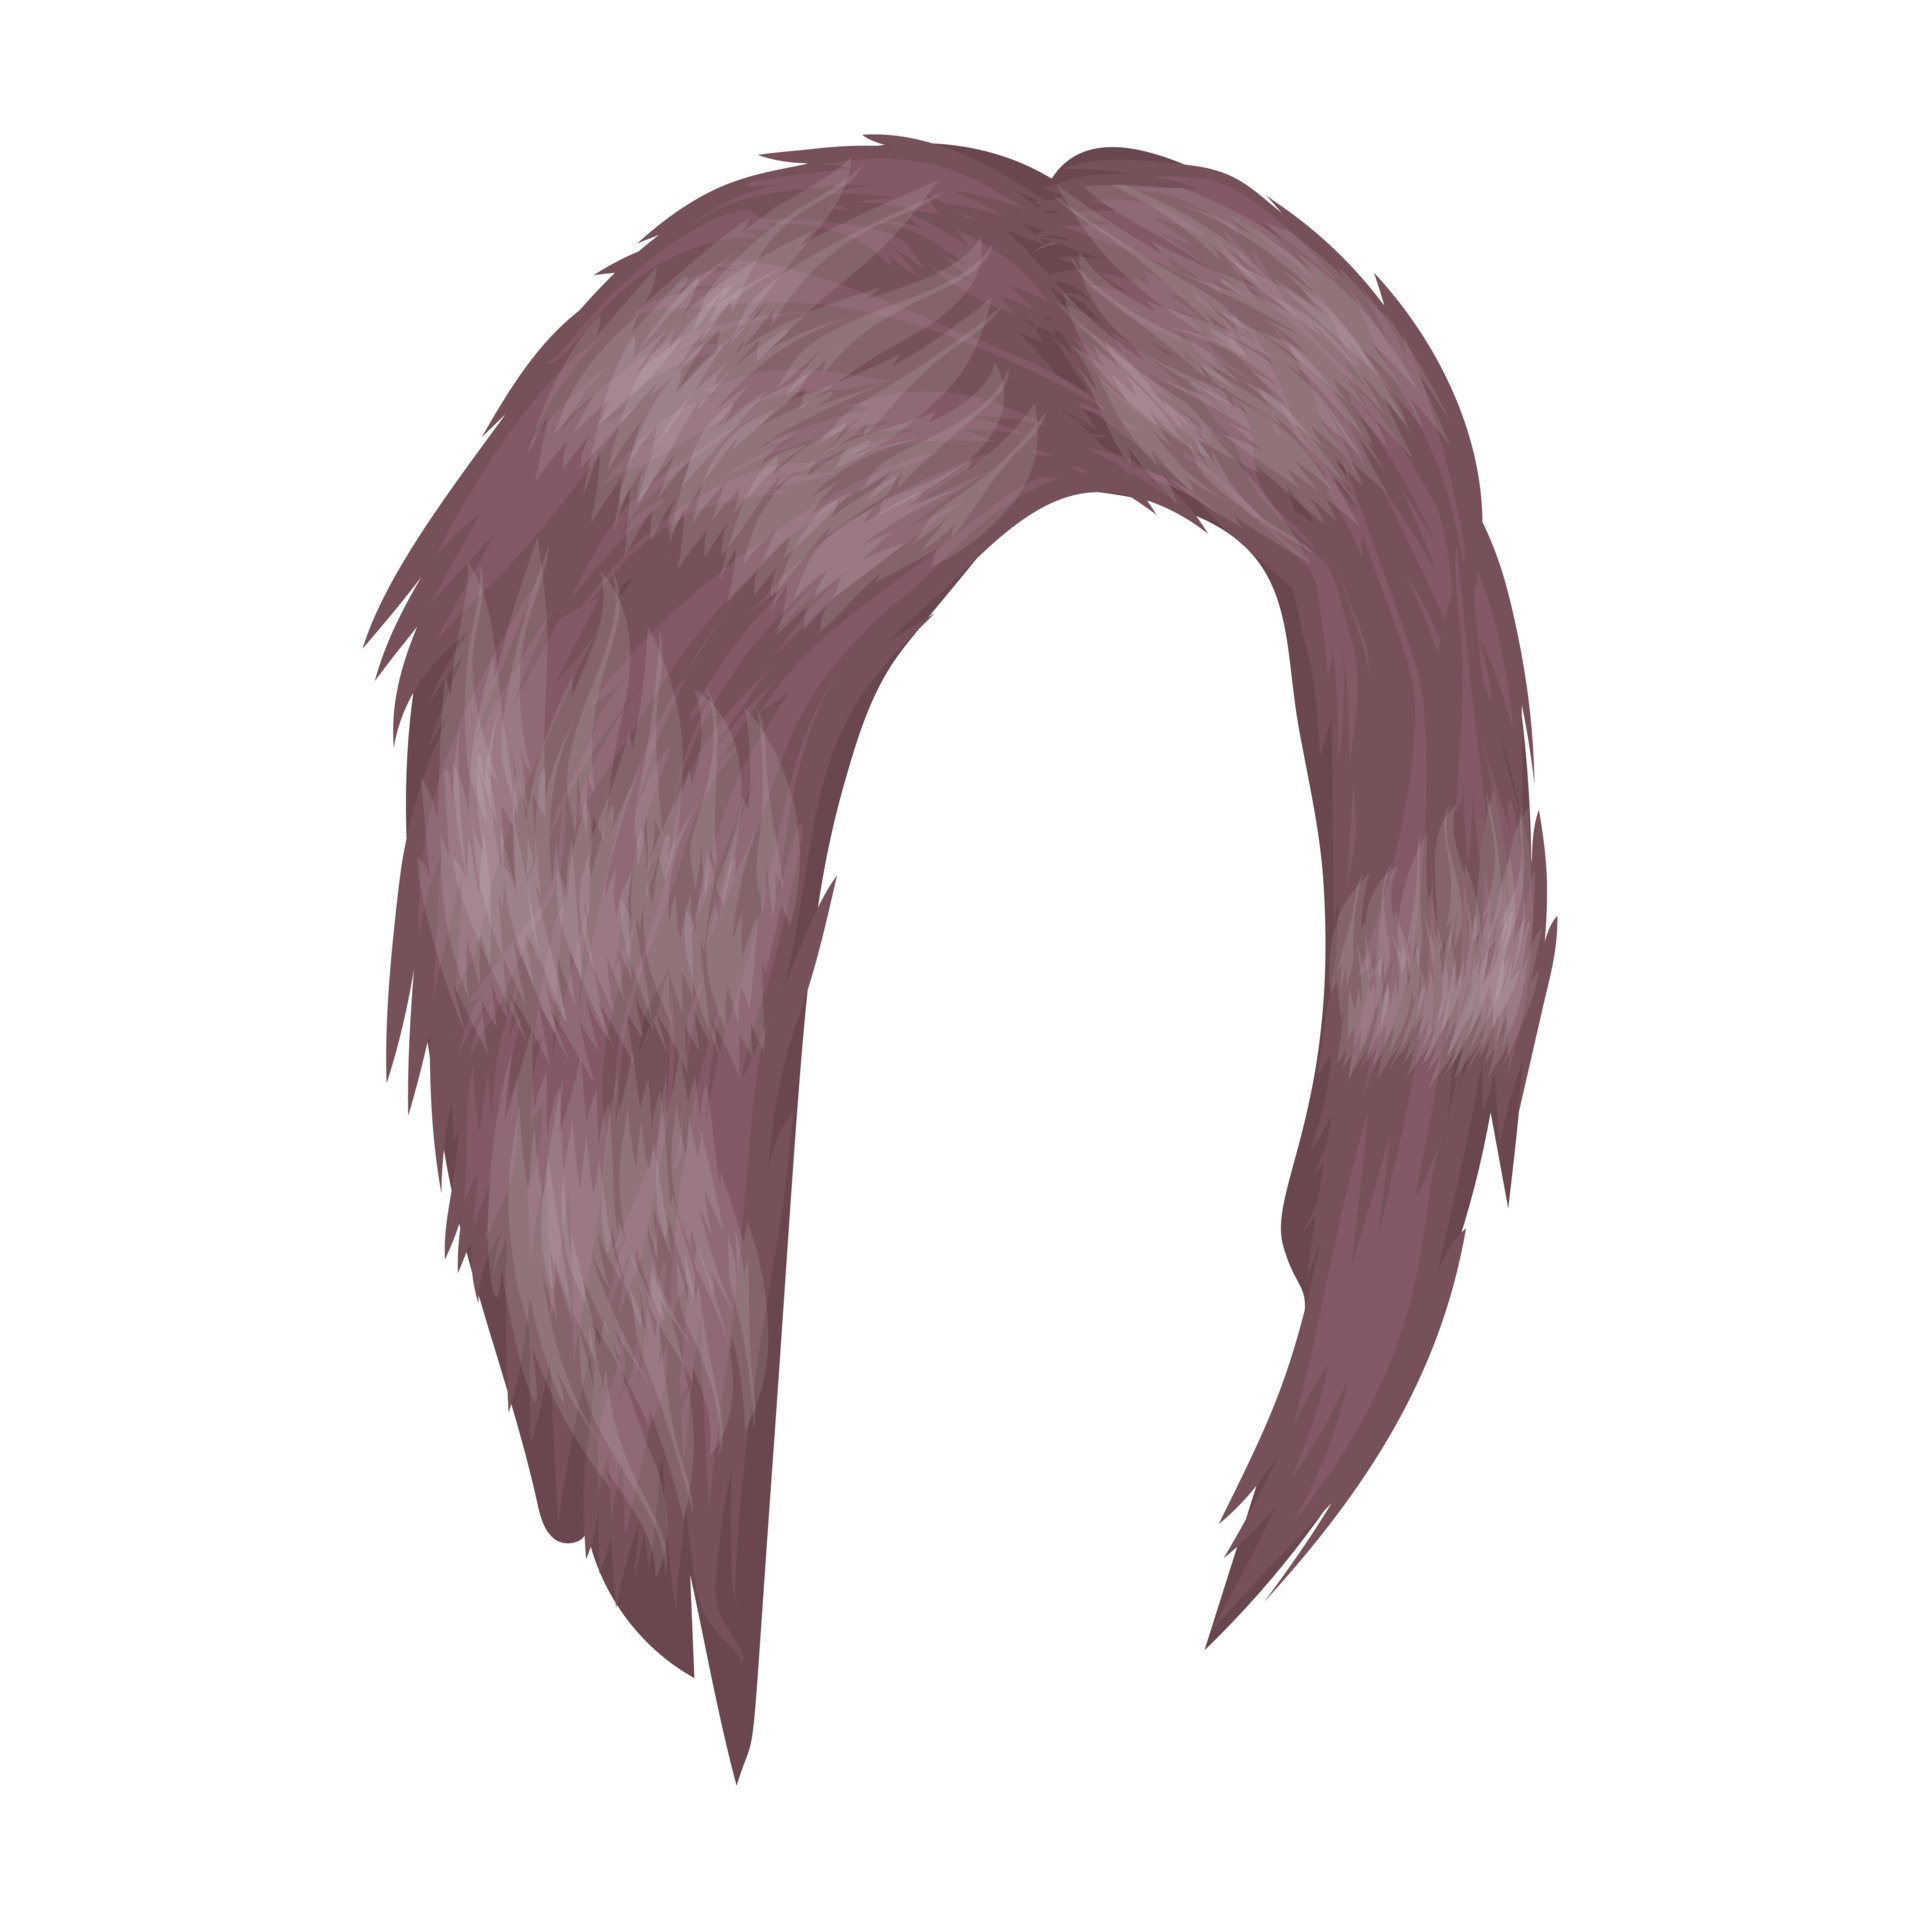 Emo Hairs Concepts 4636391 Vector Art at Vecteezy